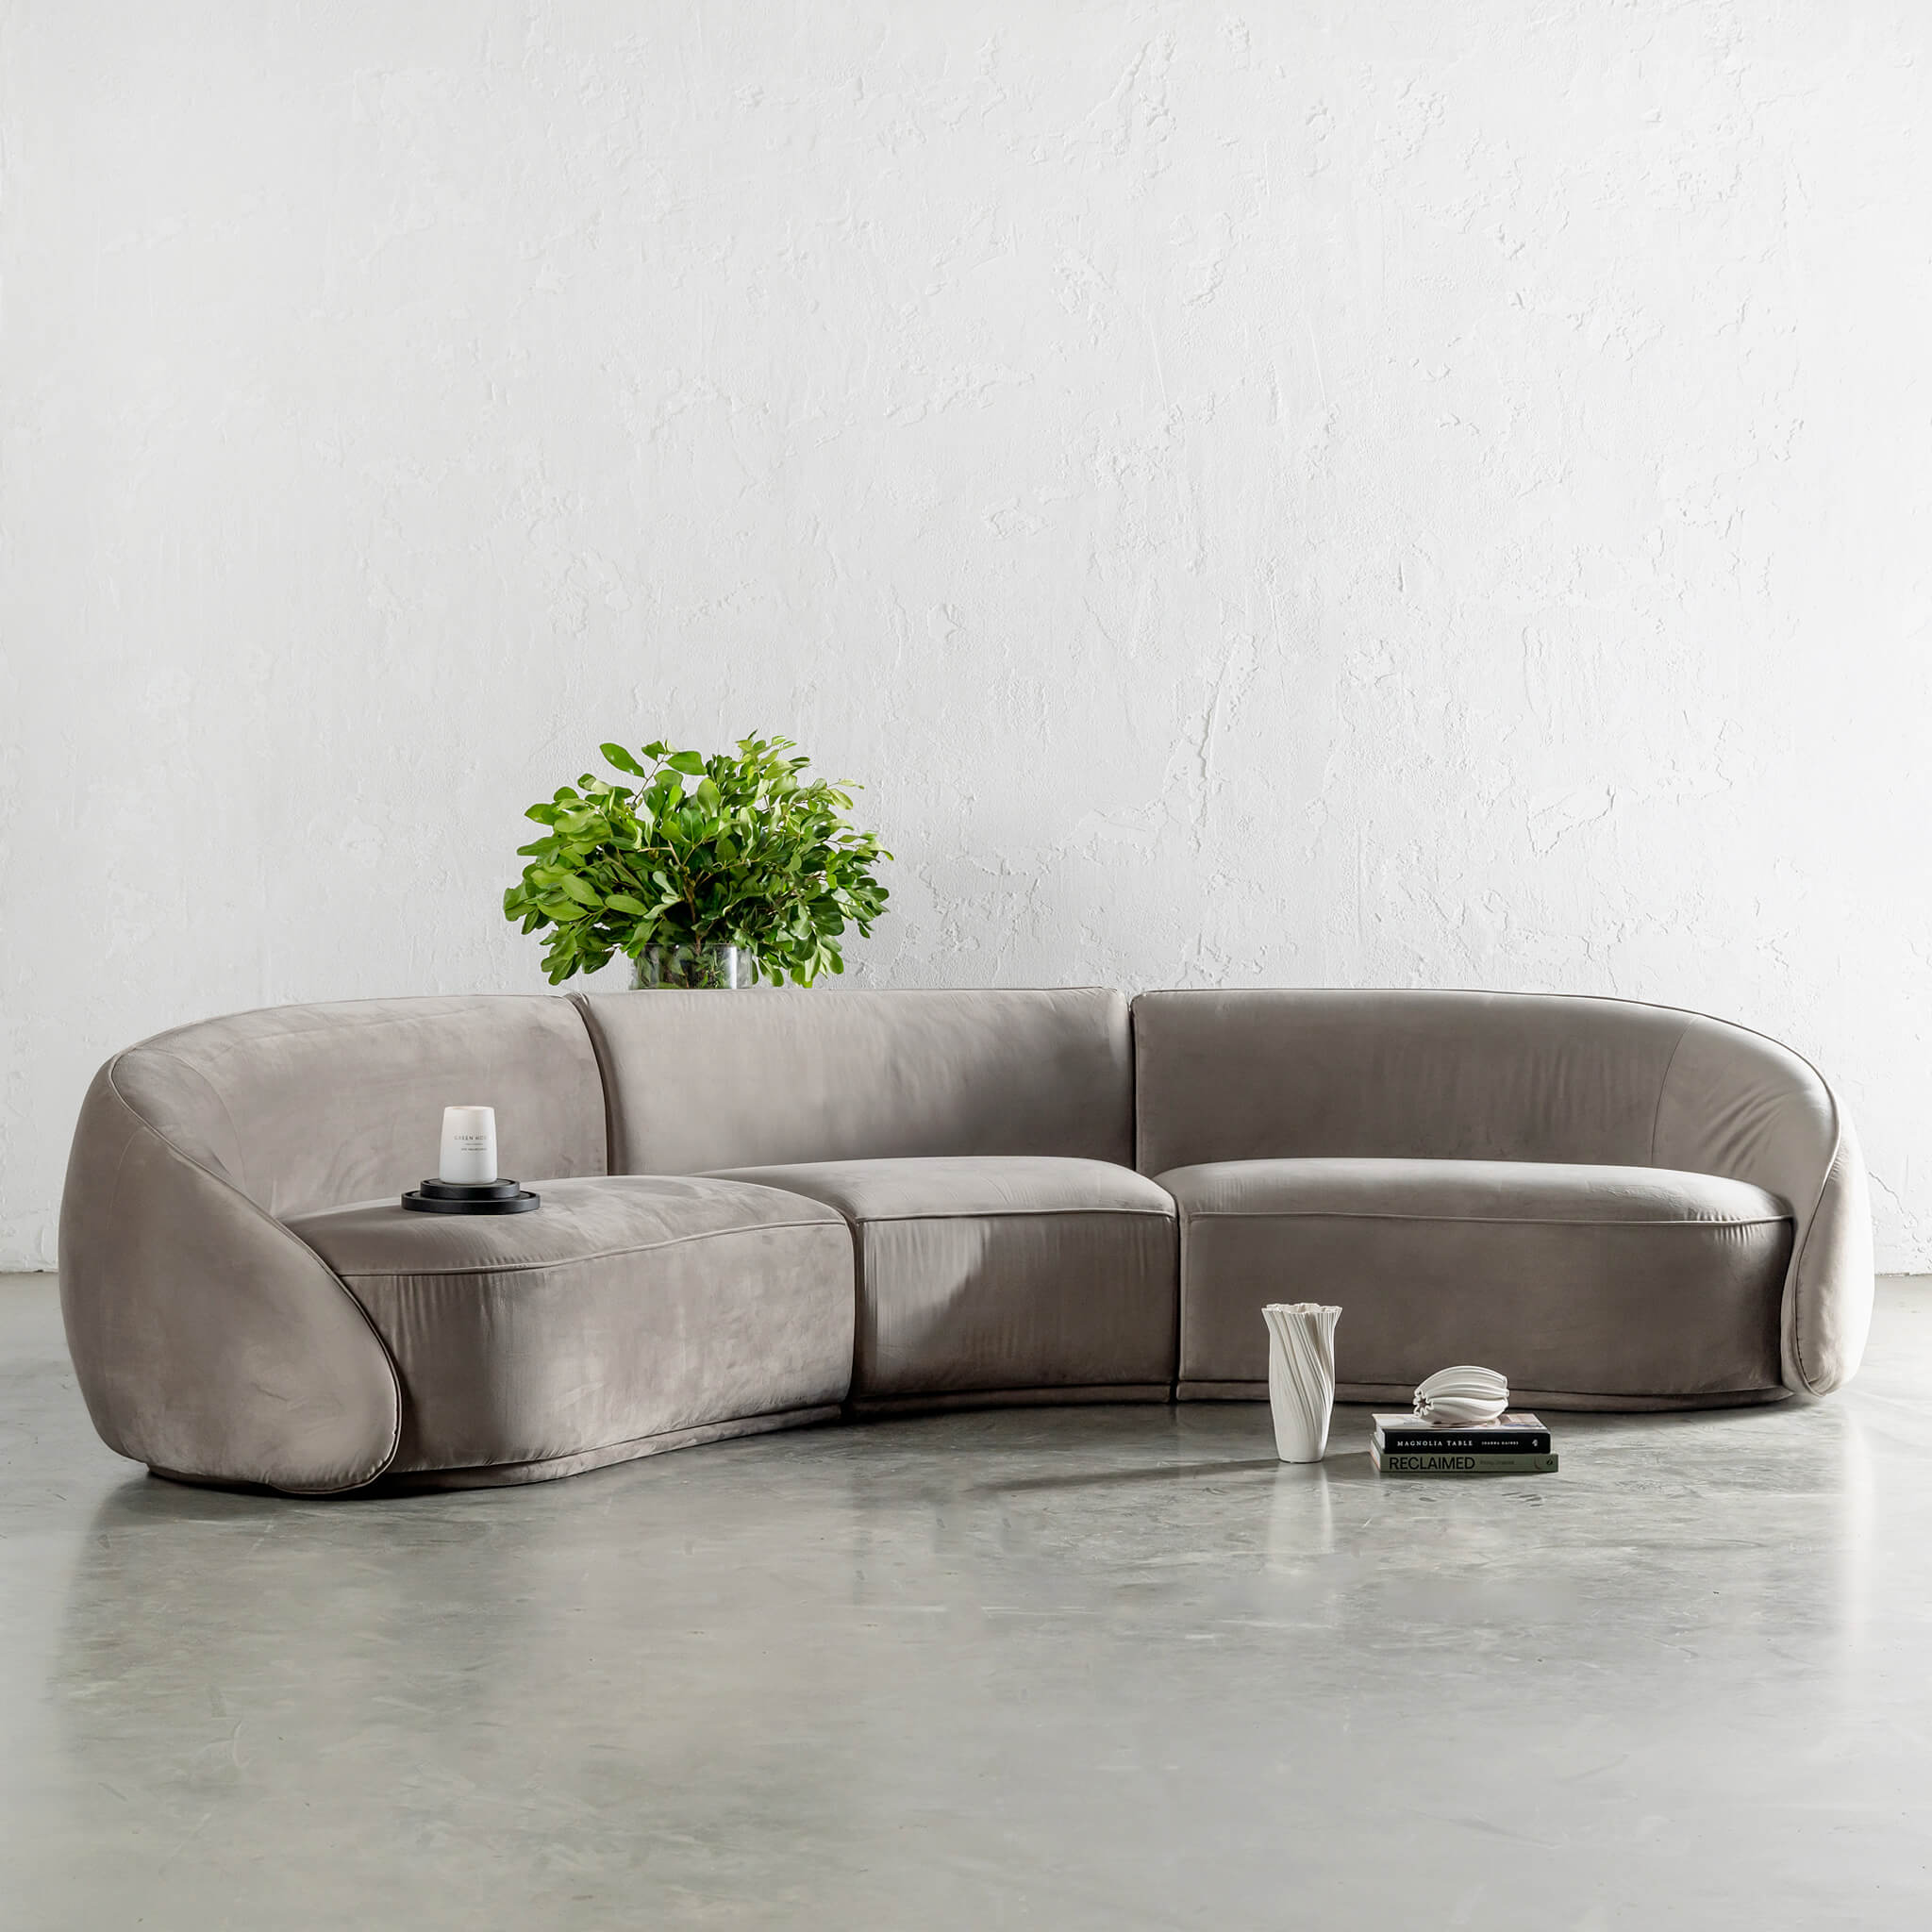 LIVING ROOM FURNITURE  |  MODERN CONTEMPORARY PIECES FOR YOUR HOME